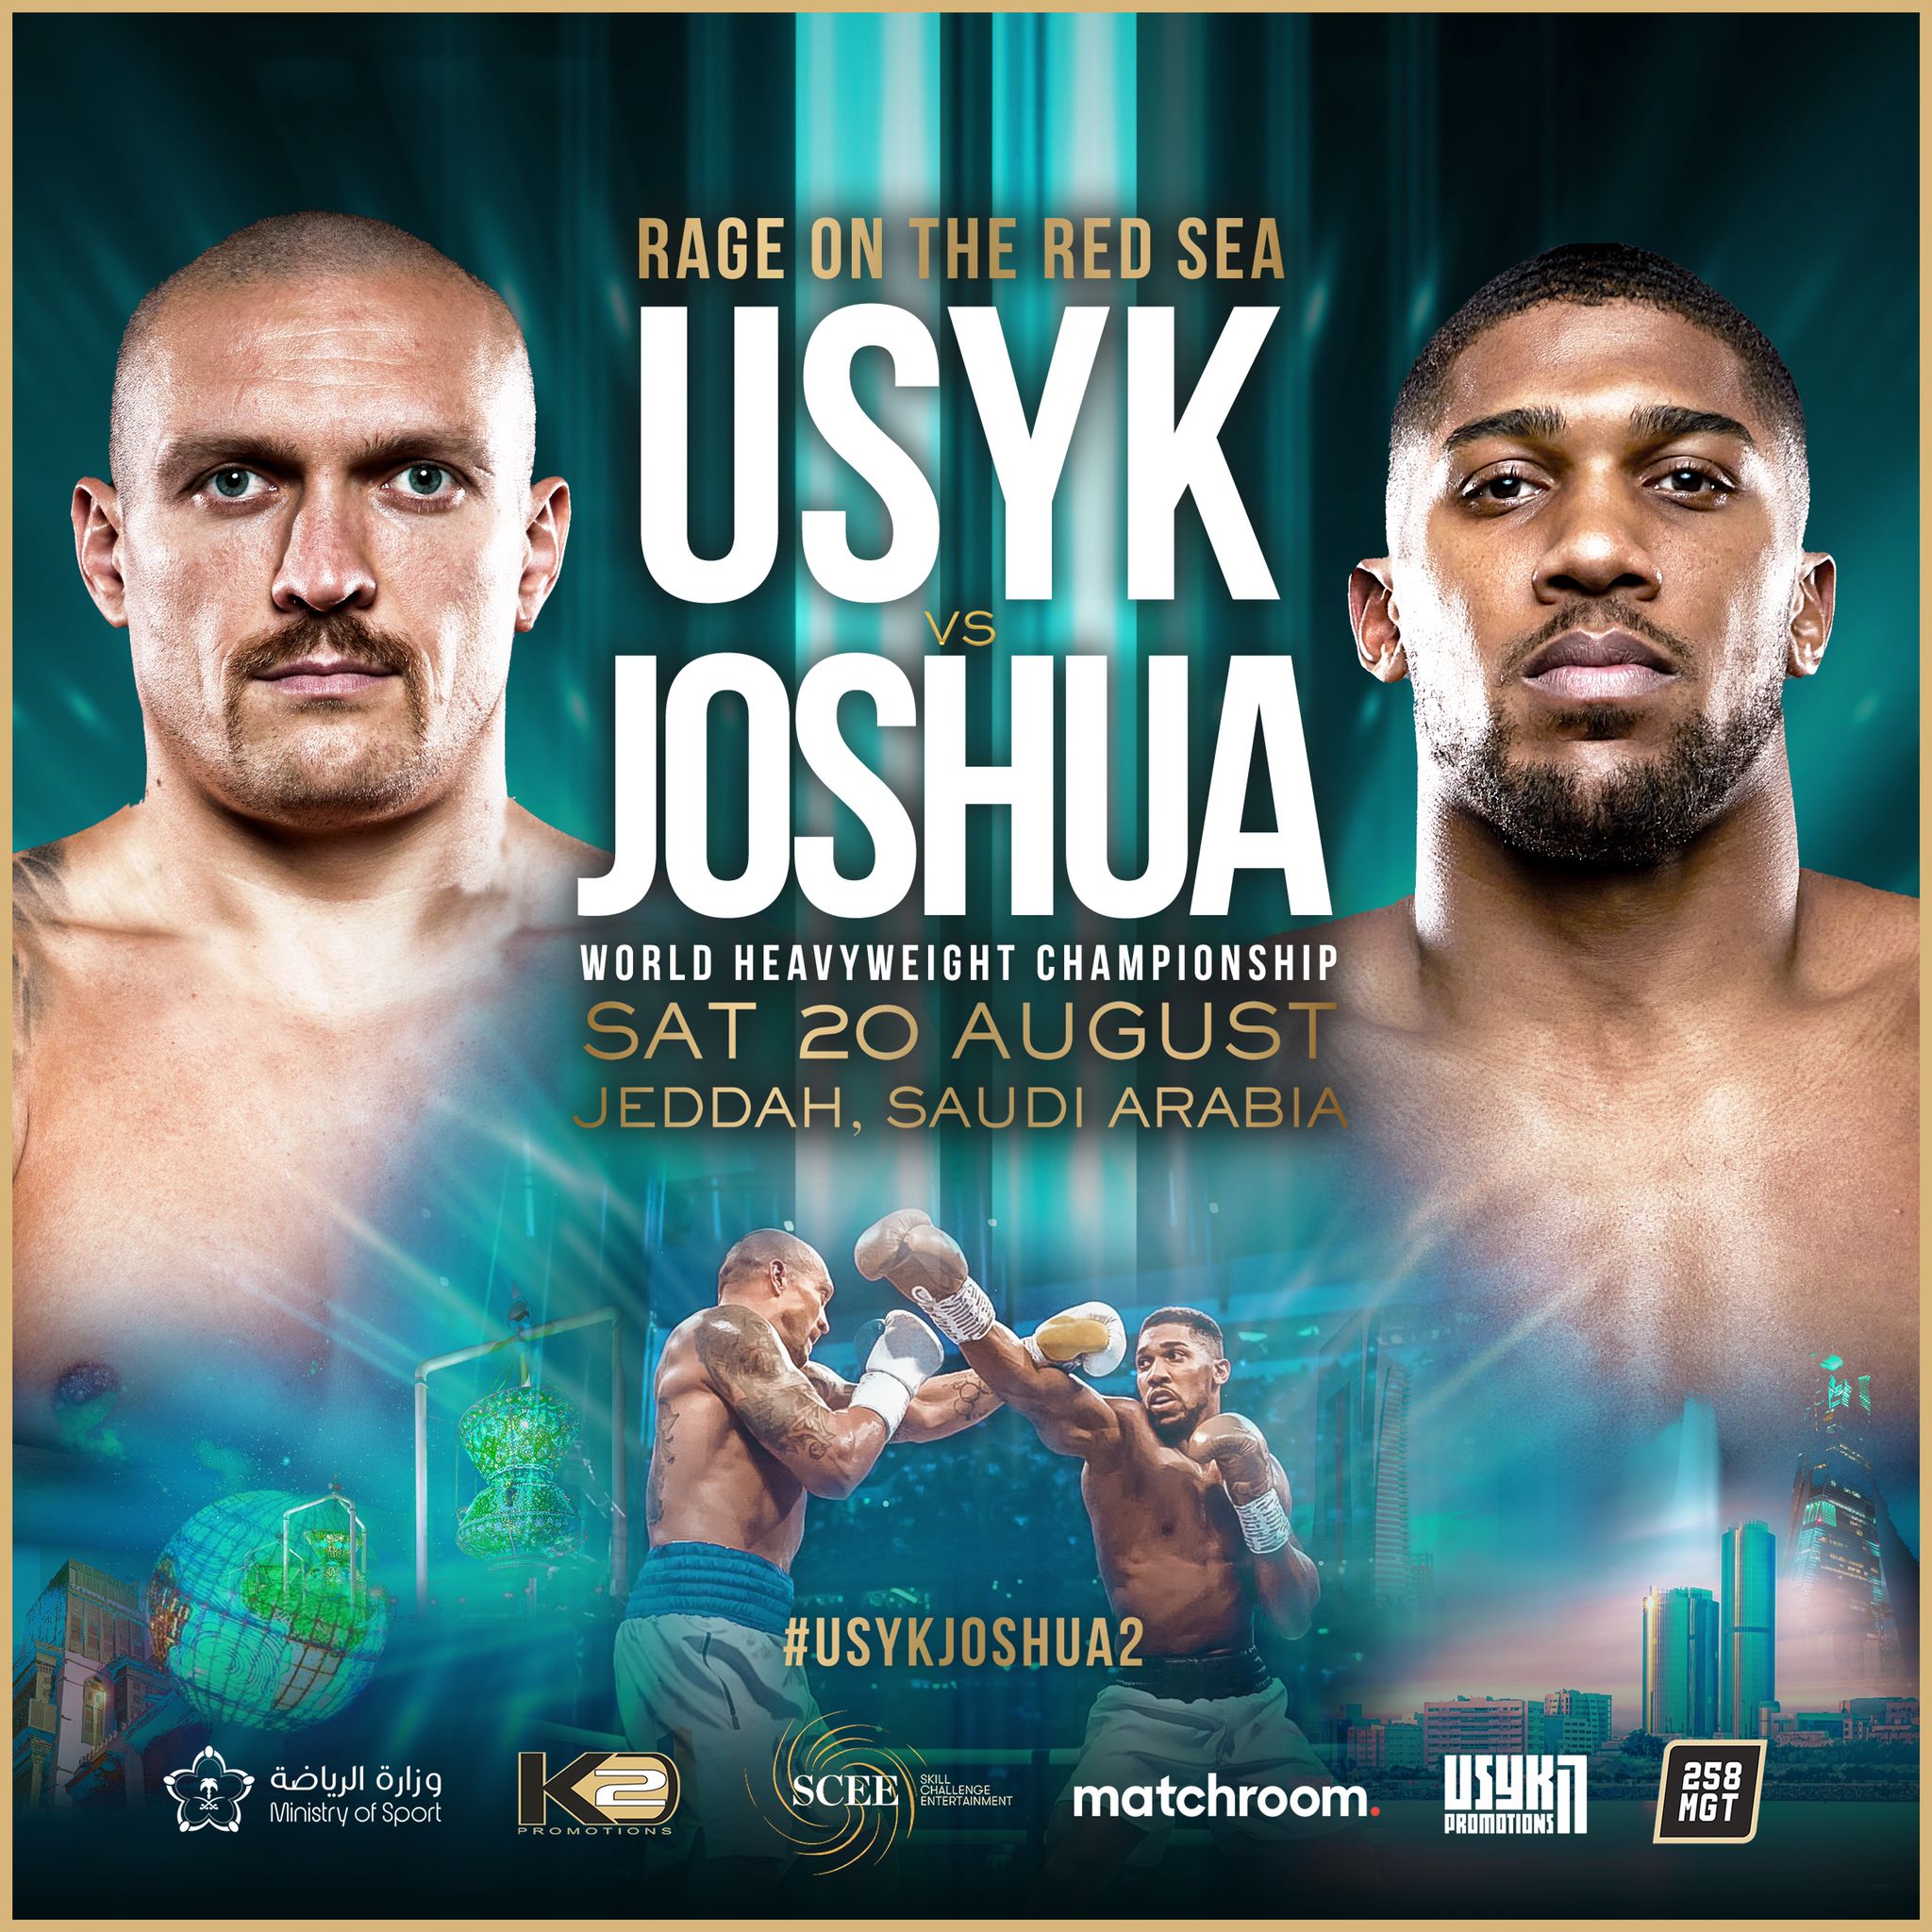 Oleksandr Usyk vs Anthony Joshua 2 is signed and set for Aug. 20 in Jeddah